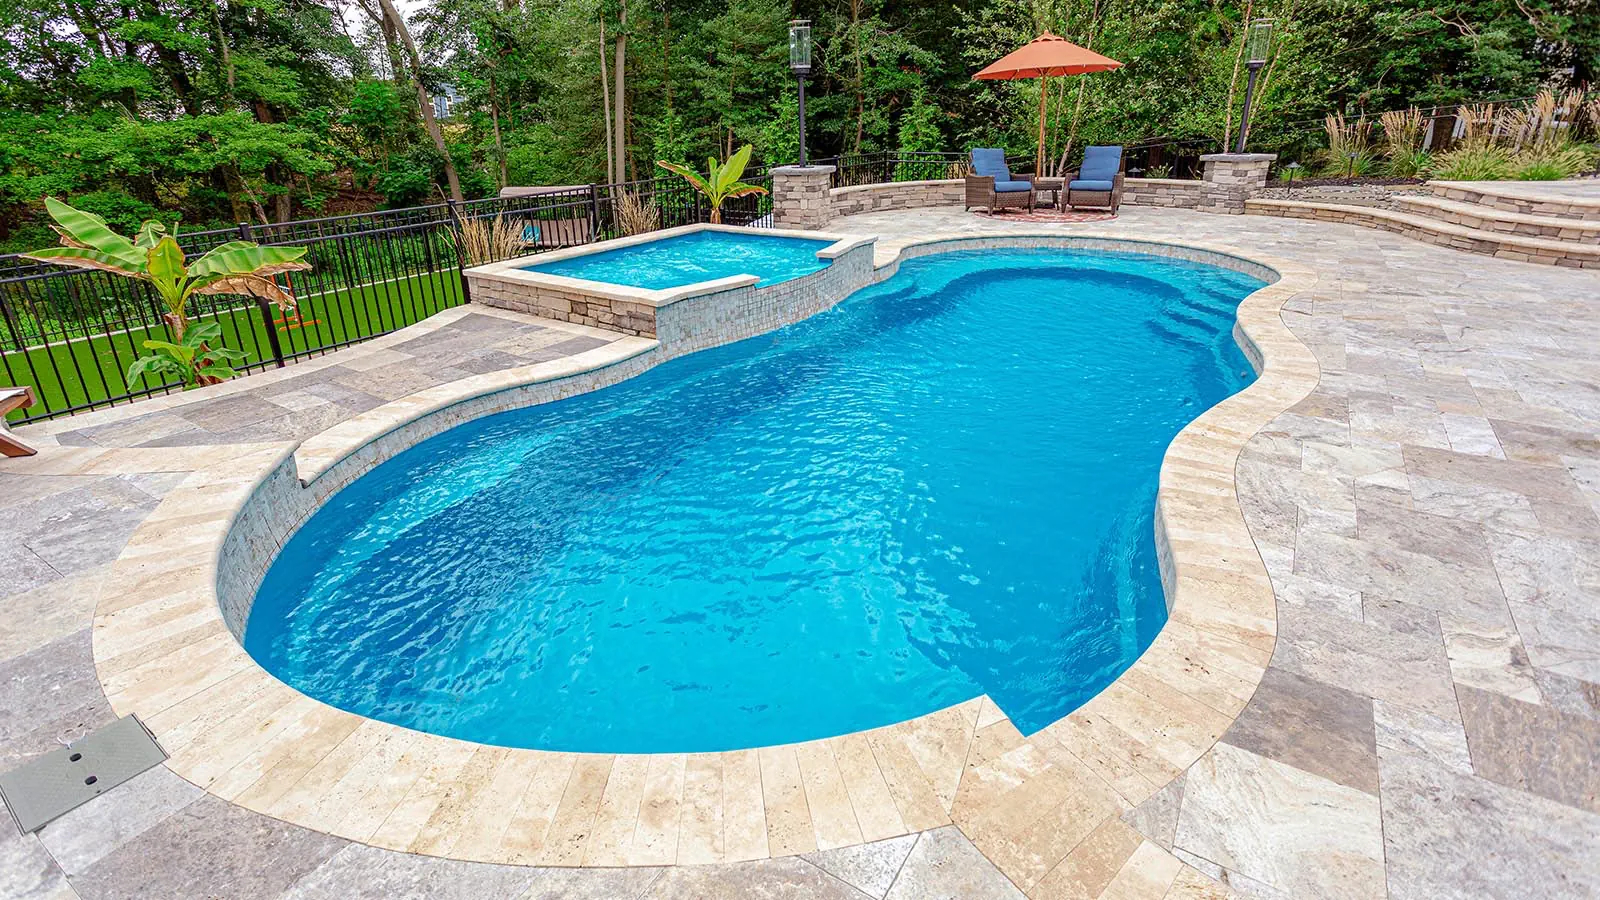 A Leisure Pools inground pool with Crystal Blue color